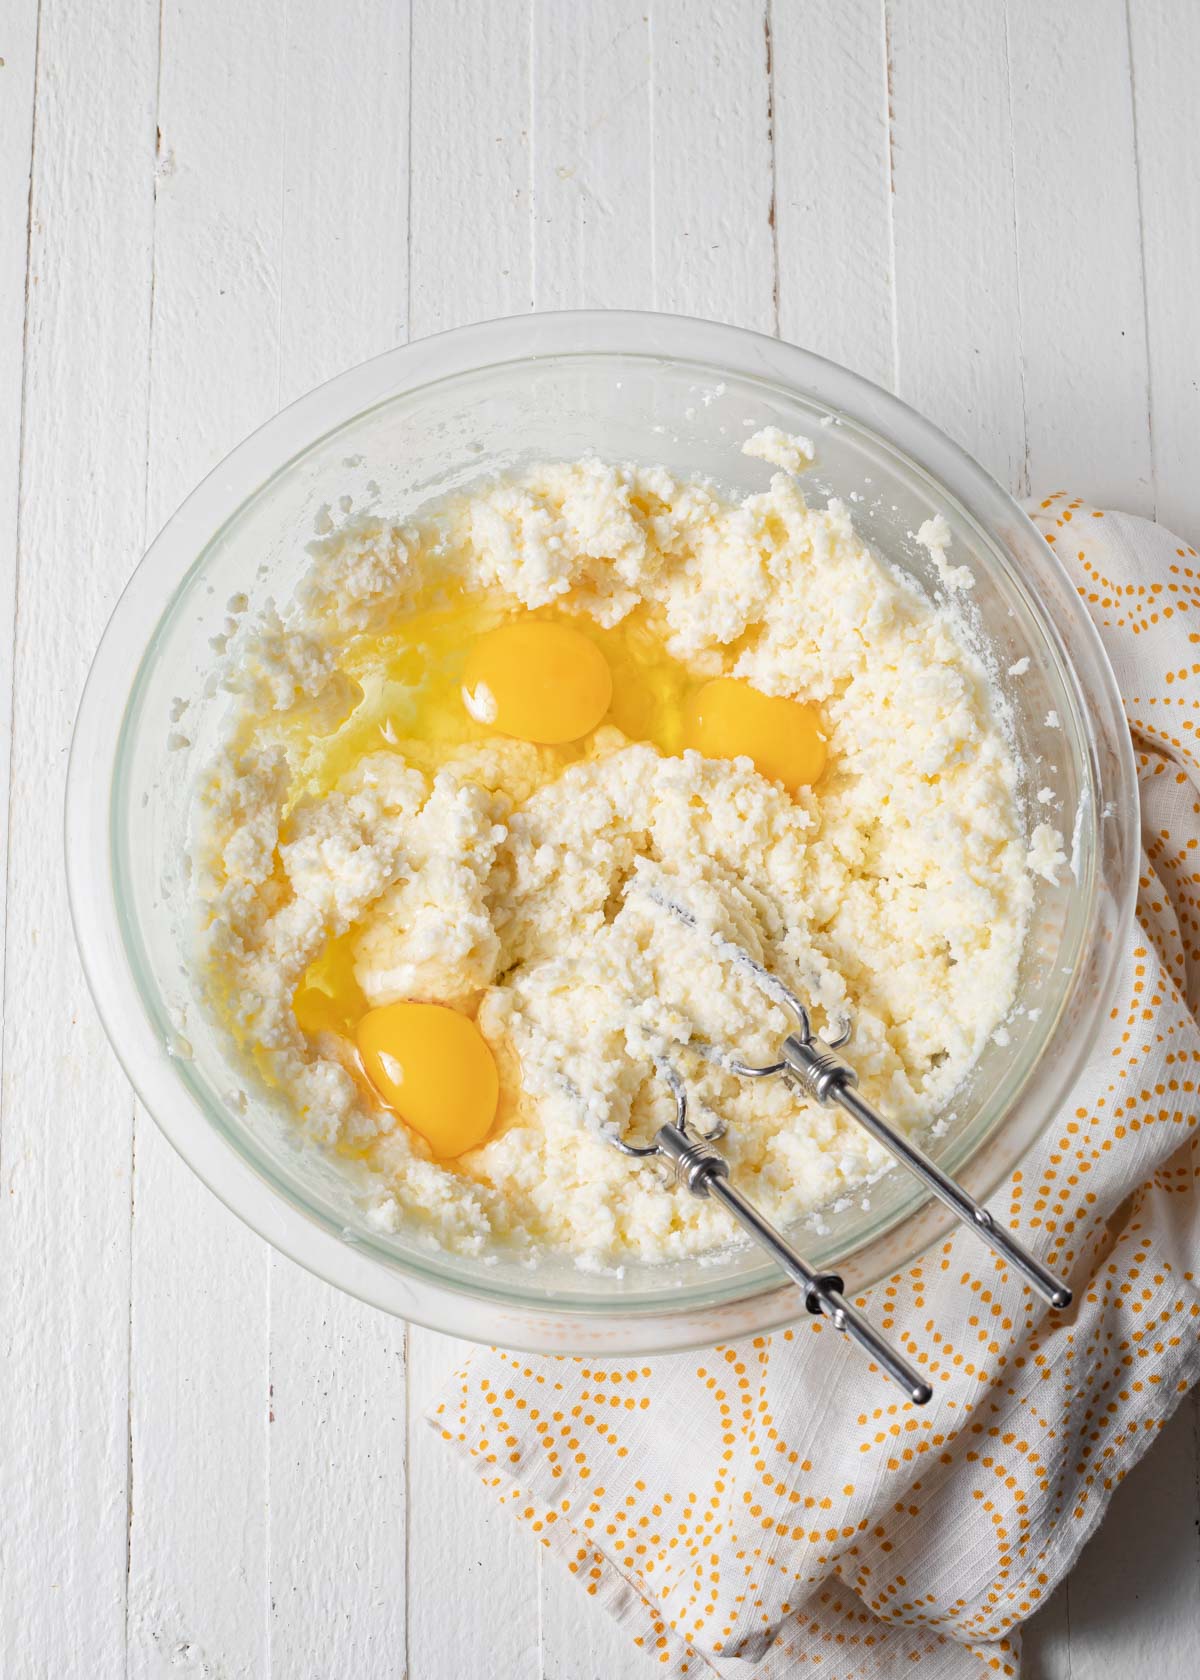 Adding eggs to ricotta cake mixture in a glass bowl